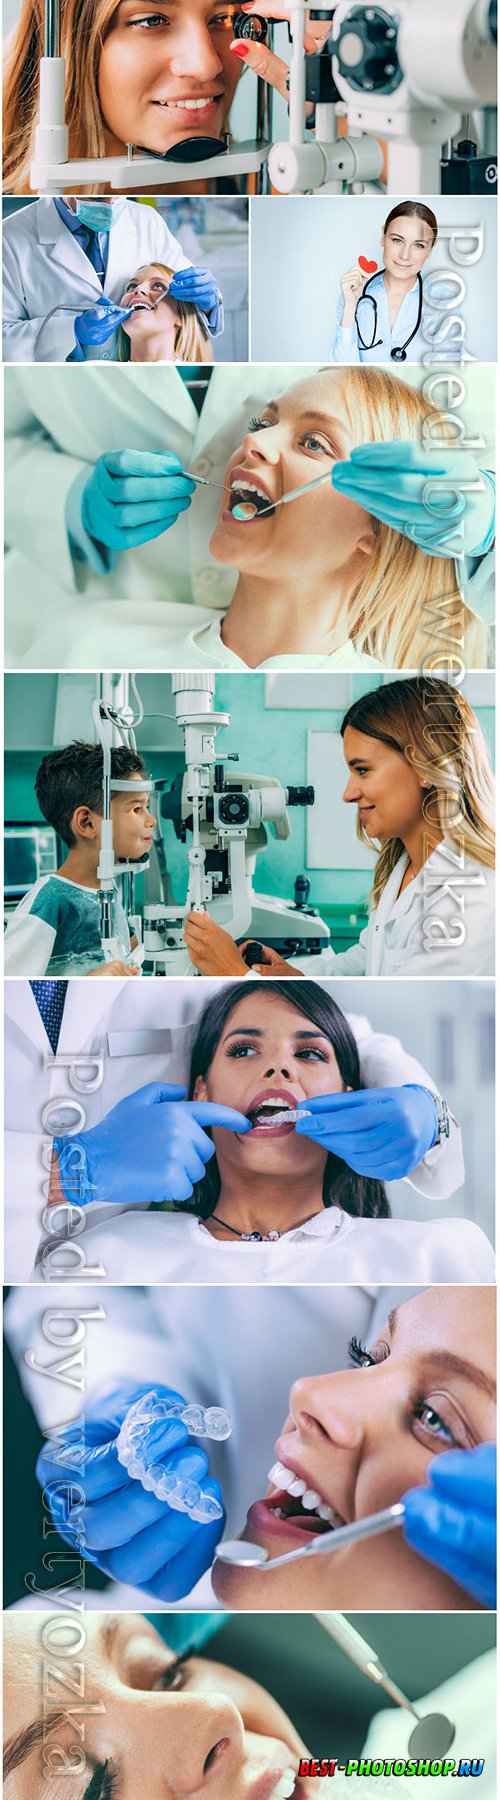 Doctor ophthalmologist and dentist, doctor's appointment, medicine